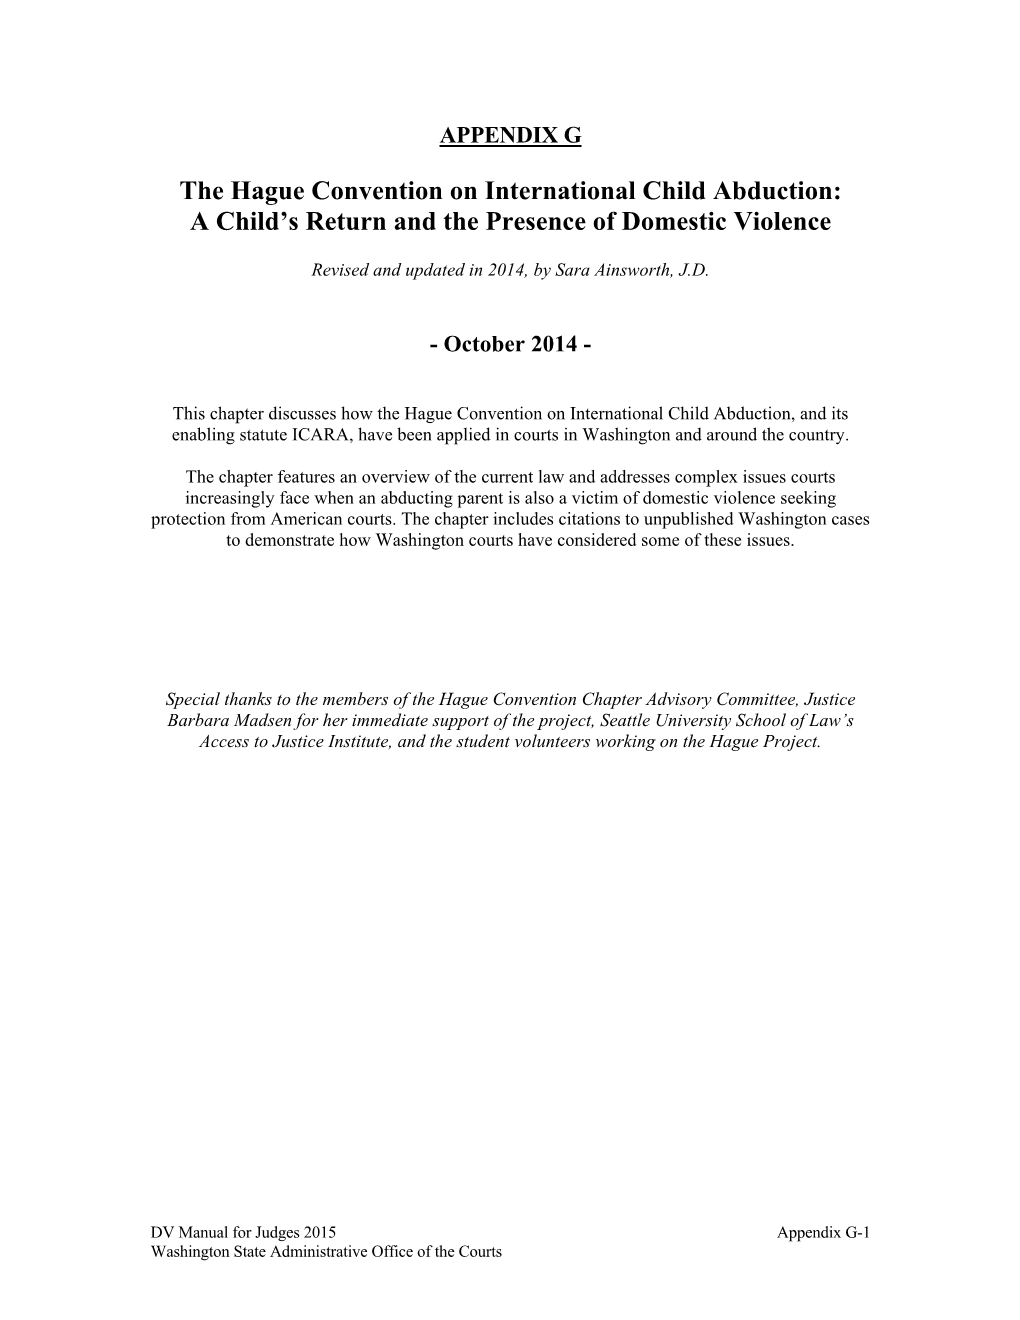 The Hague Convention on International Child Abduction: a Child’S Return and the Presence of Domestic Violence